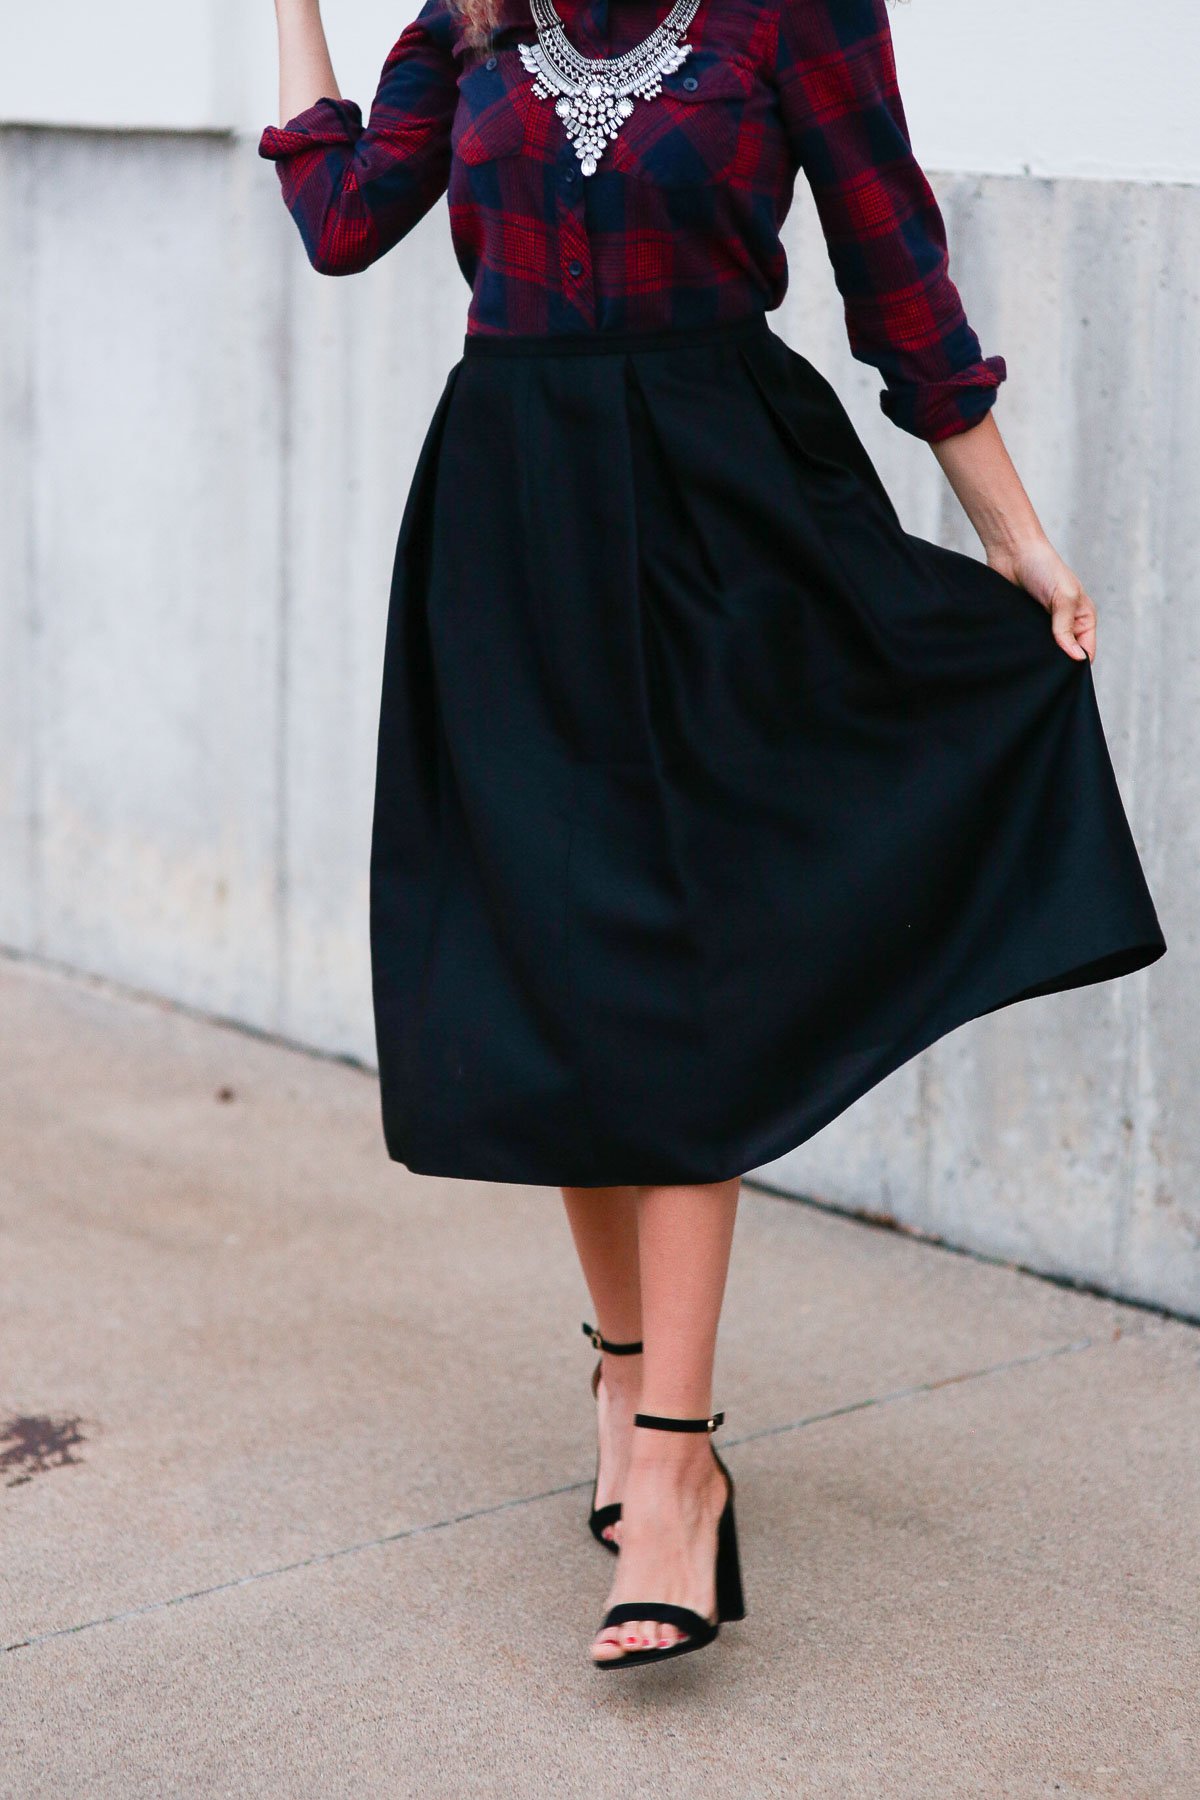 holiday outfits featuring a high waist skirt and a plaid shirt